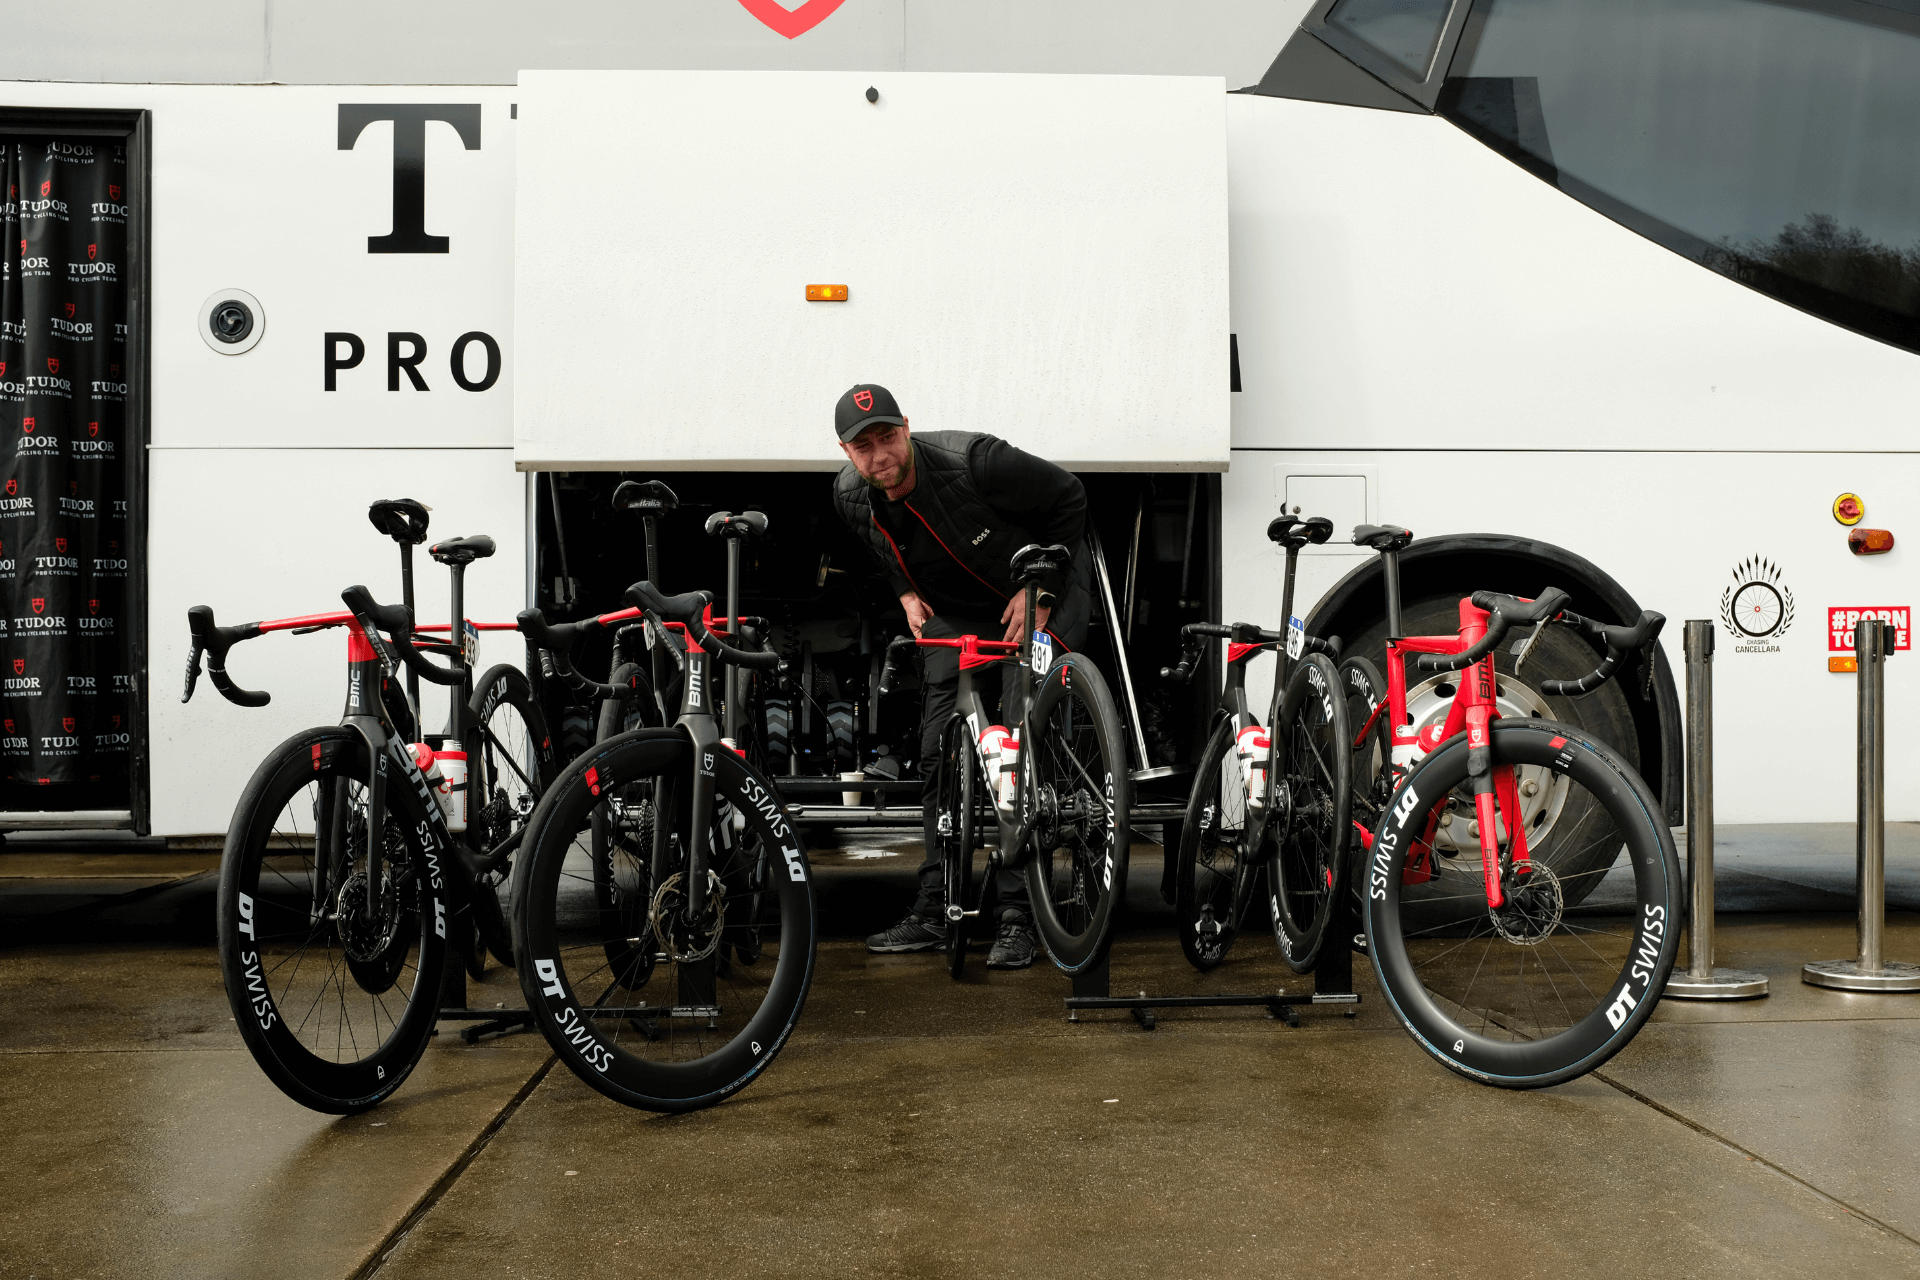 A row of high end road bikes being prepped by a mechanic in front of a team bus